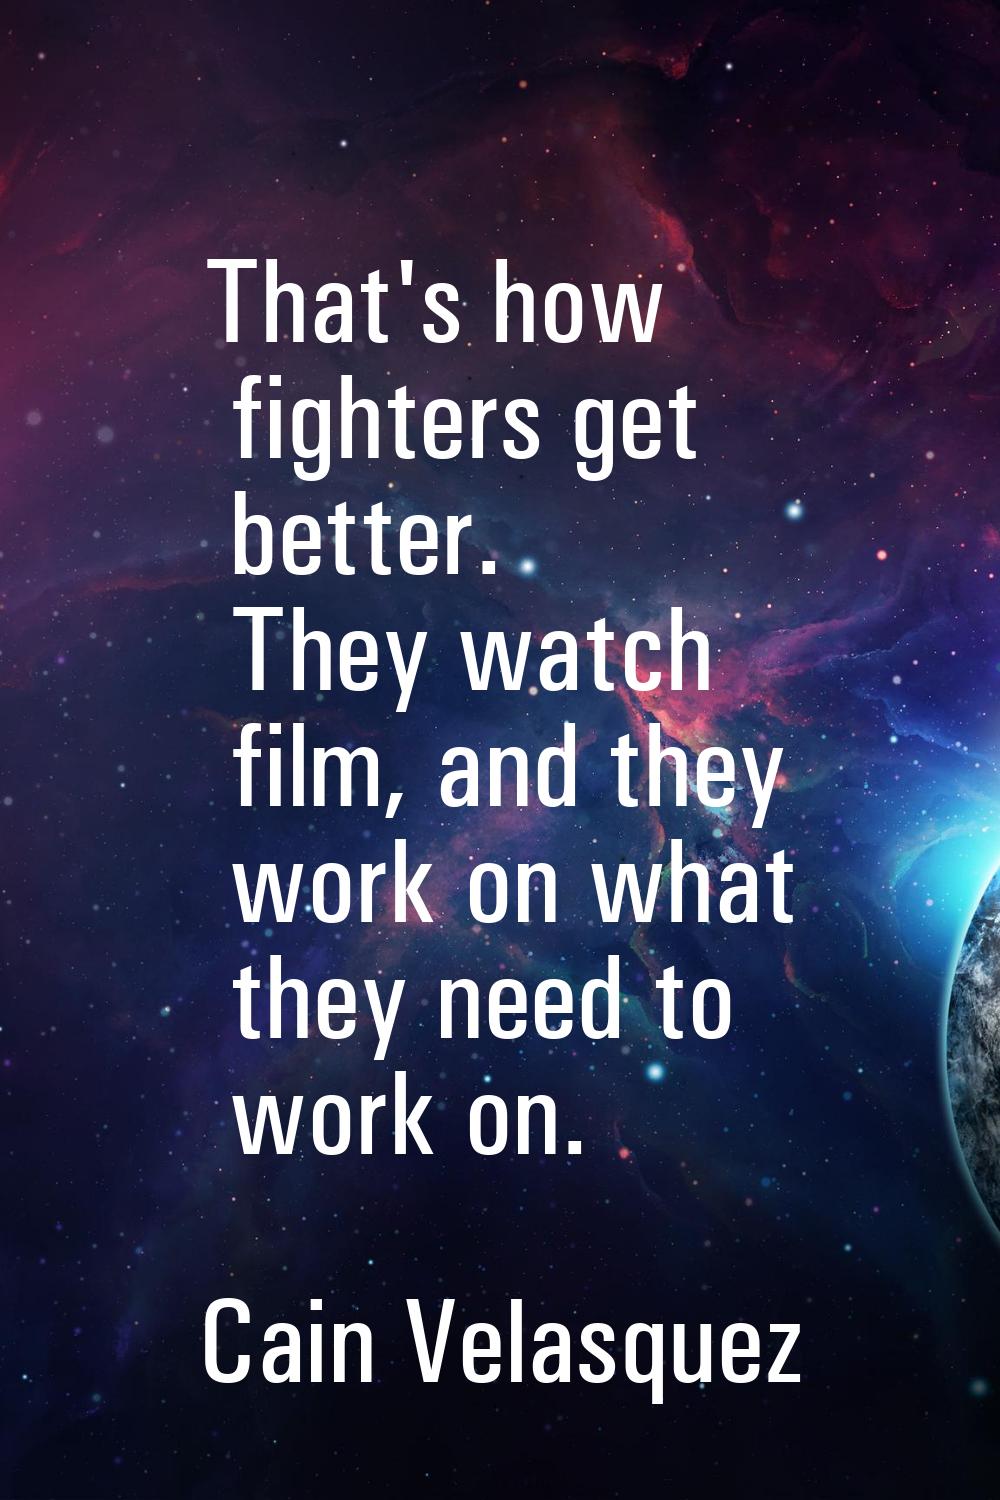 That's how fighters get better. They watch film, and they work on what they need to work on.